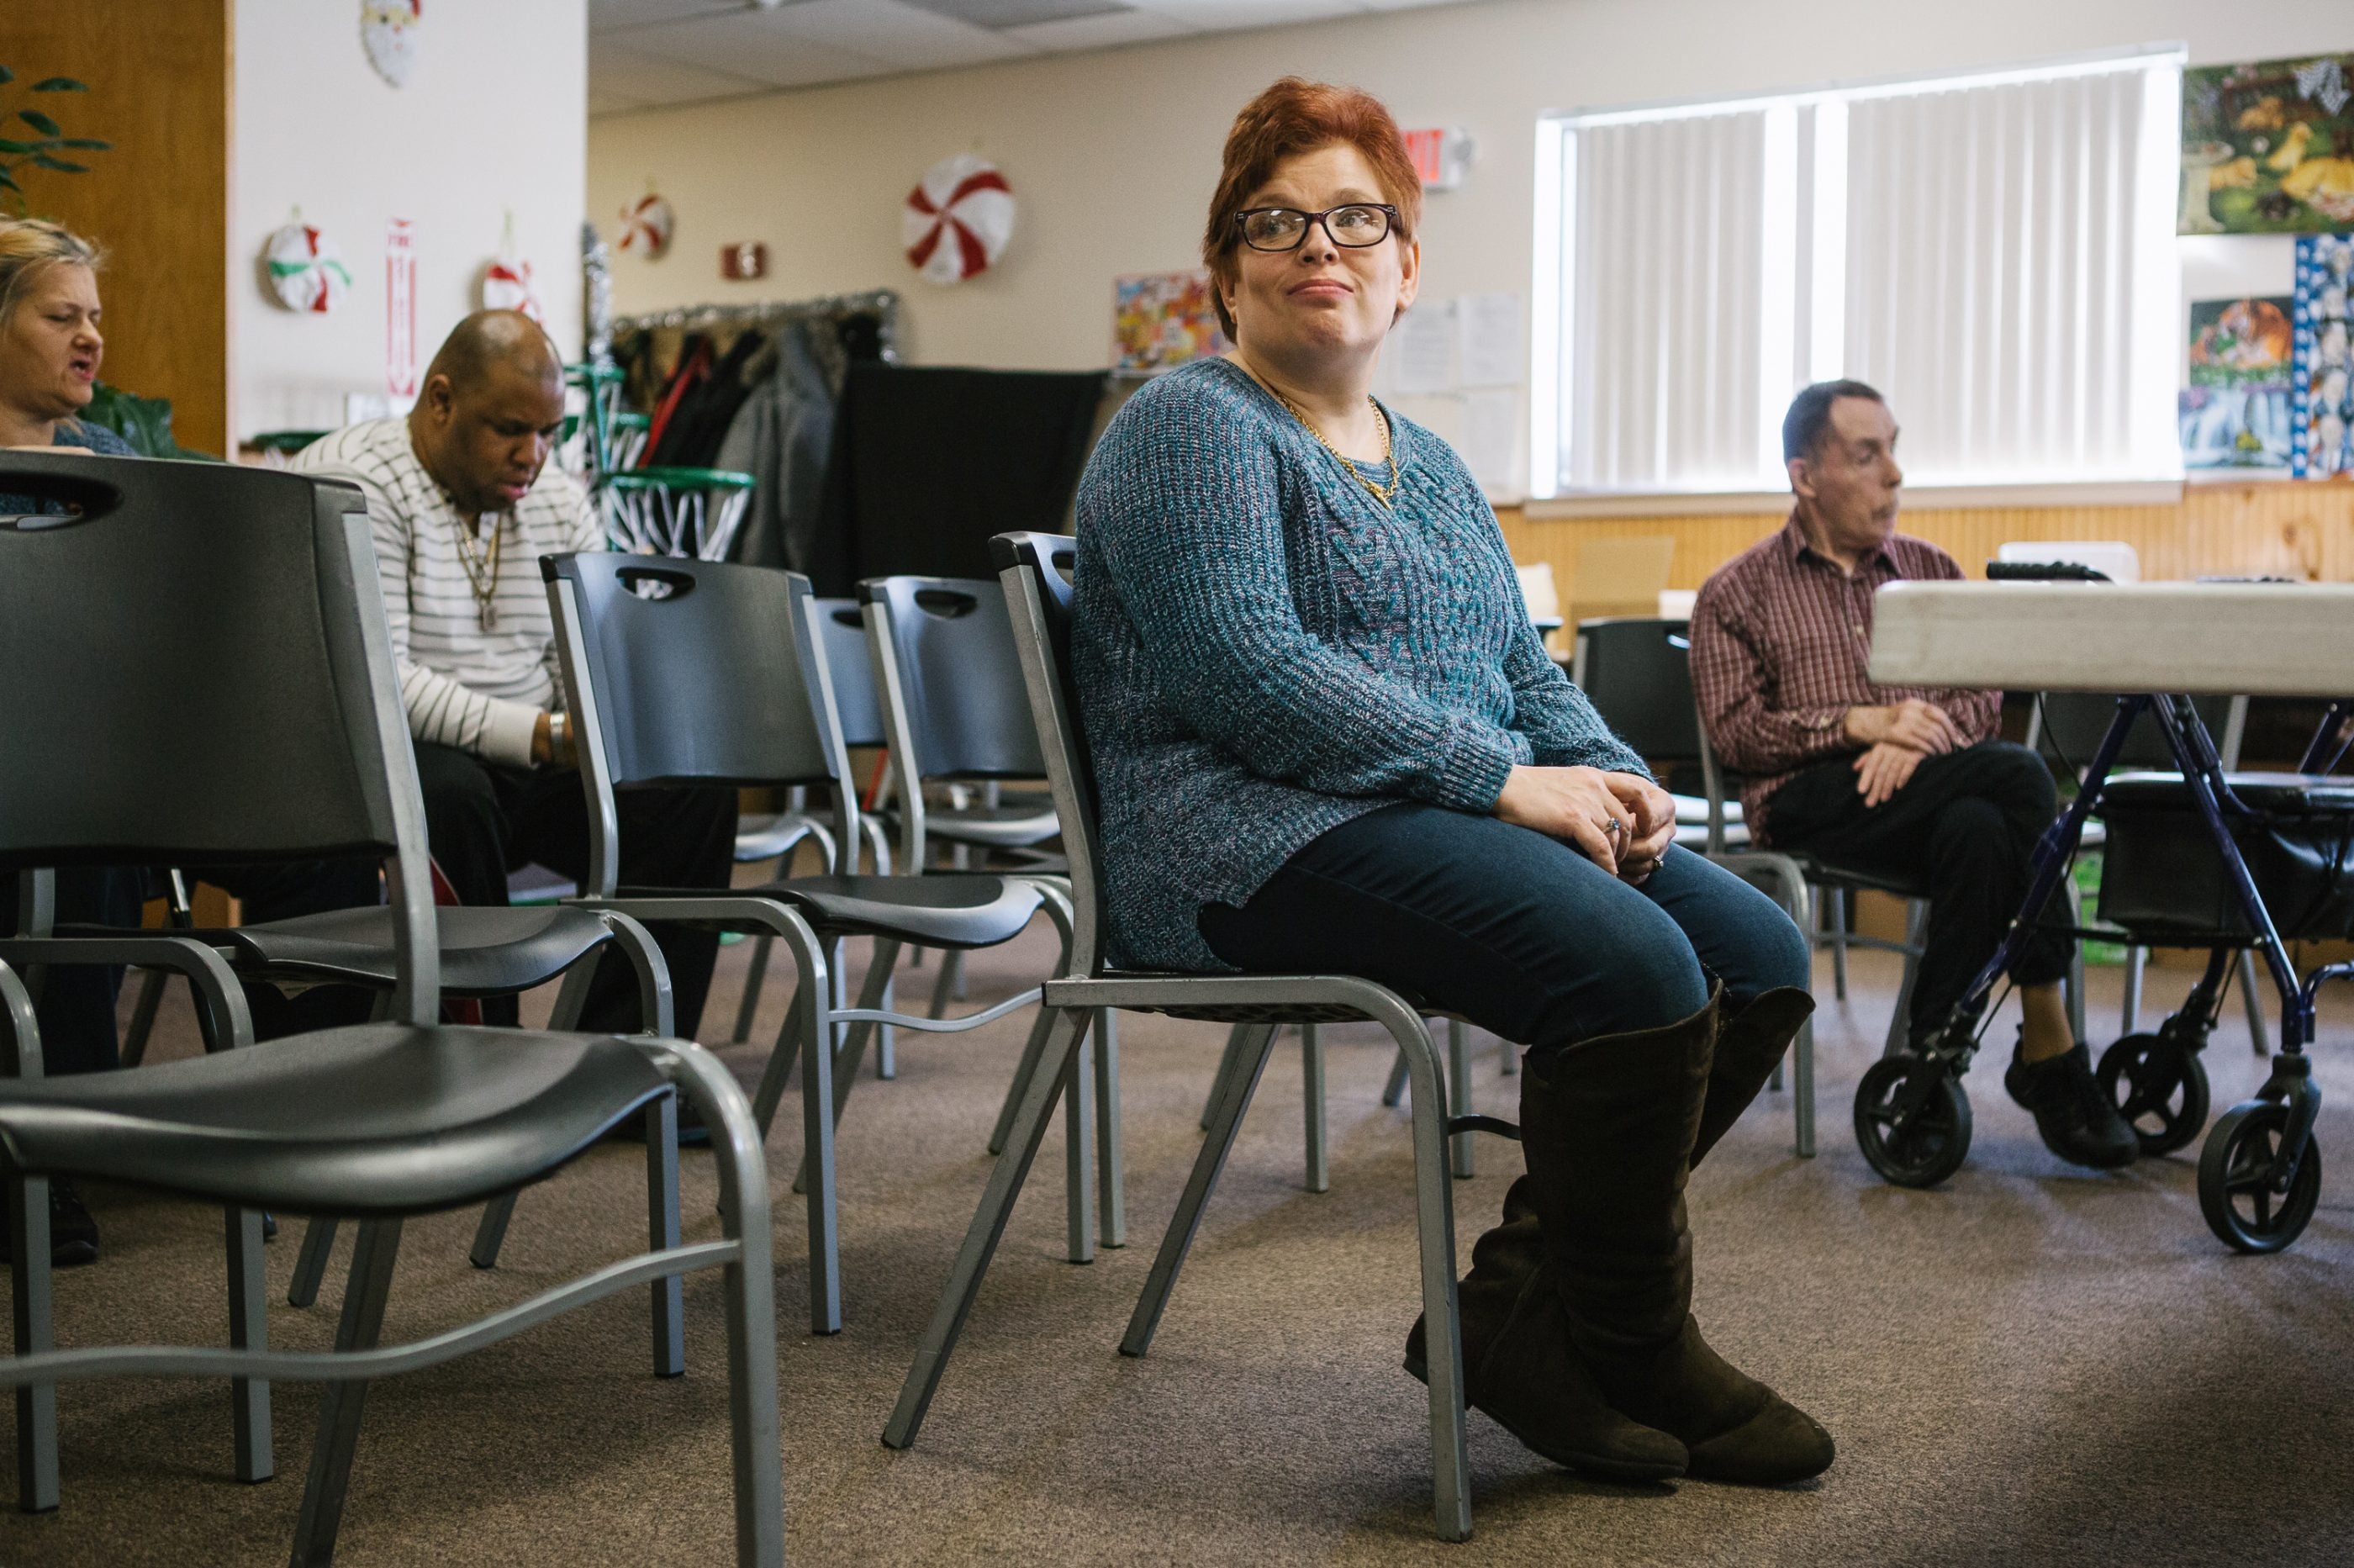 Pauline sits after practice for a Christmas show with fellow group members of a day program at the Arc Northeastern Pennsylvania. Pauline, who has intellectual disabilities, has been with the Arc program since 2014, after an emergency removal from her previous caretaker's home by Adult Protective Services when she was sexually assaulted.